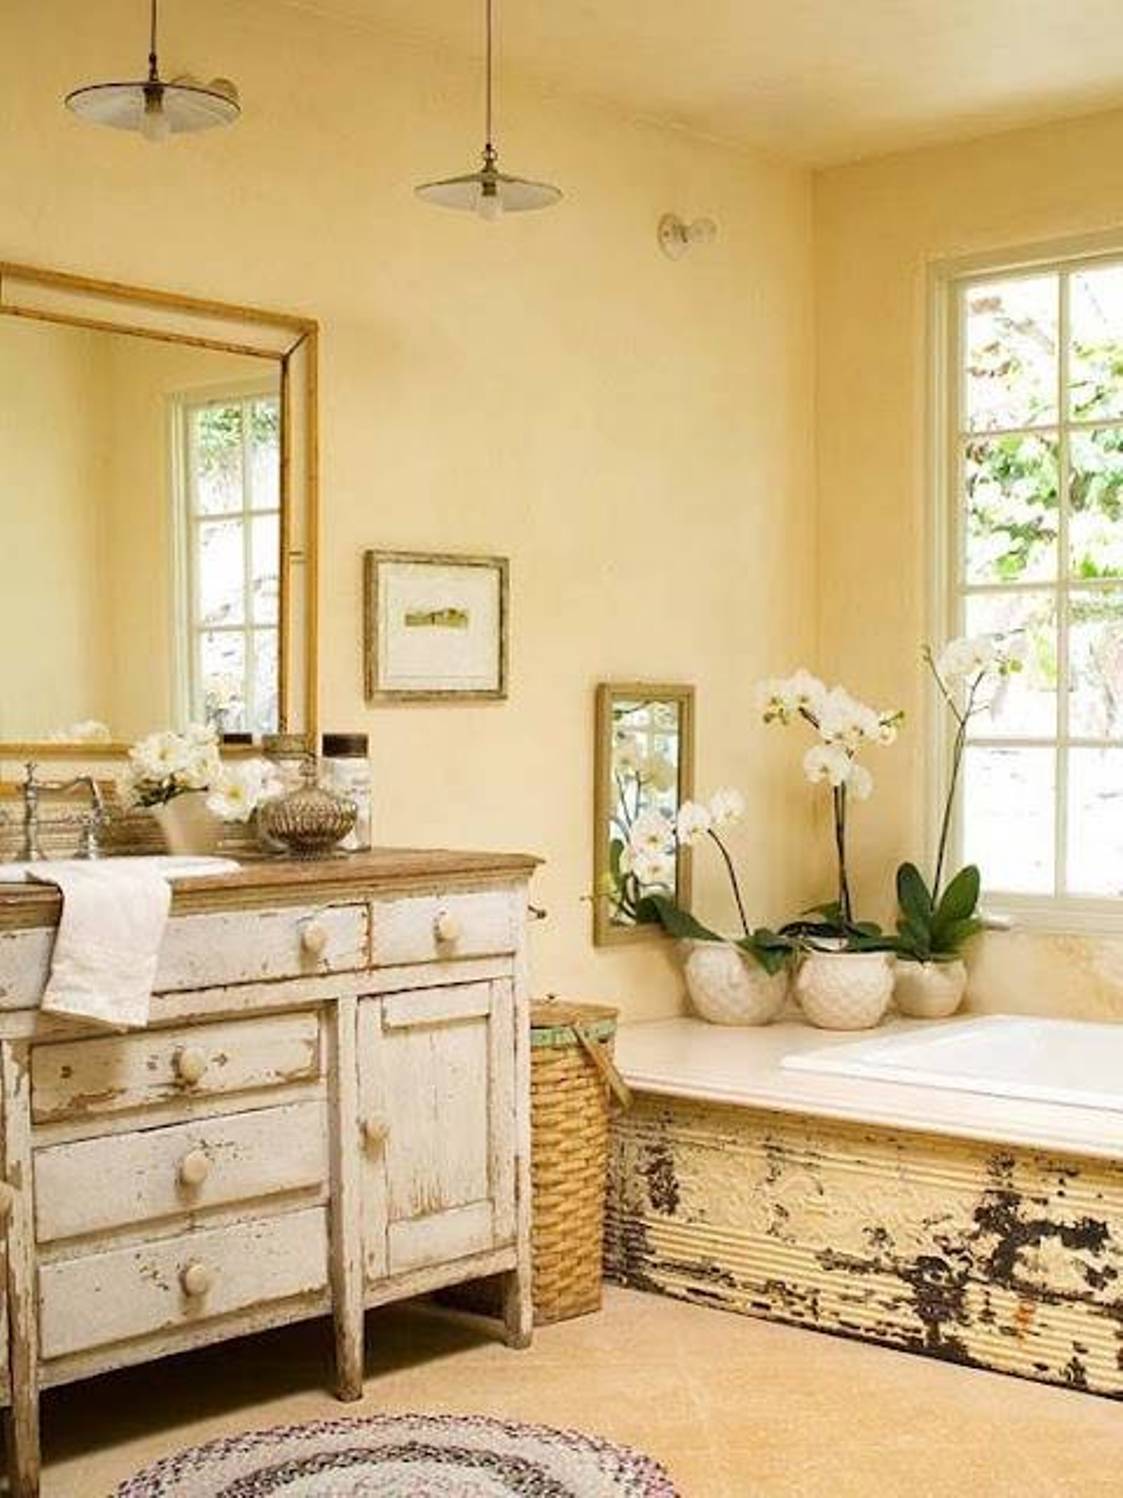 Bathroom in the shabby chic cottage